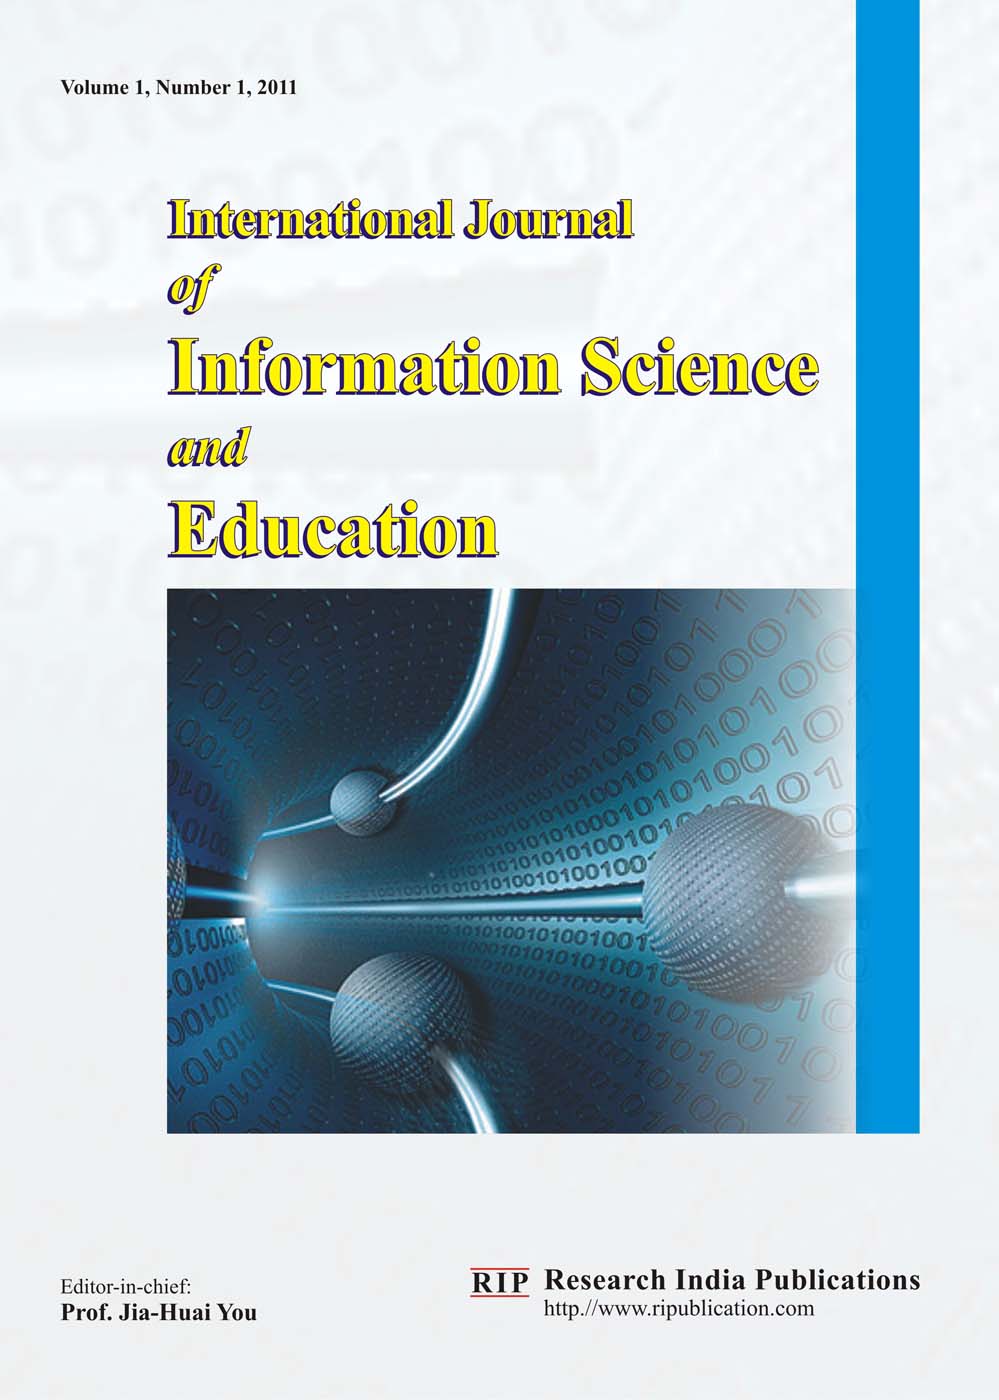 International Journal of Information Science and Education